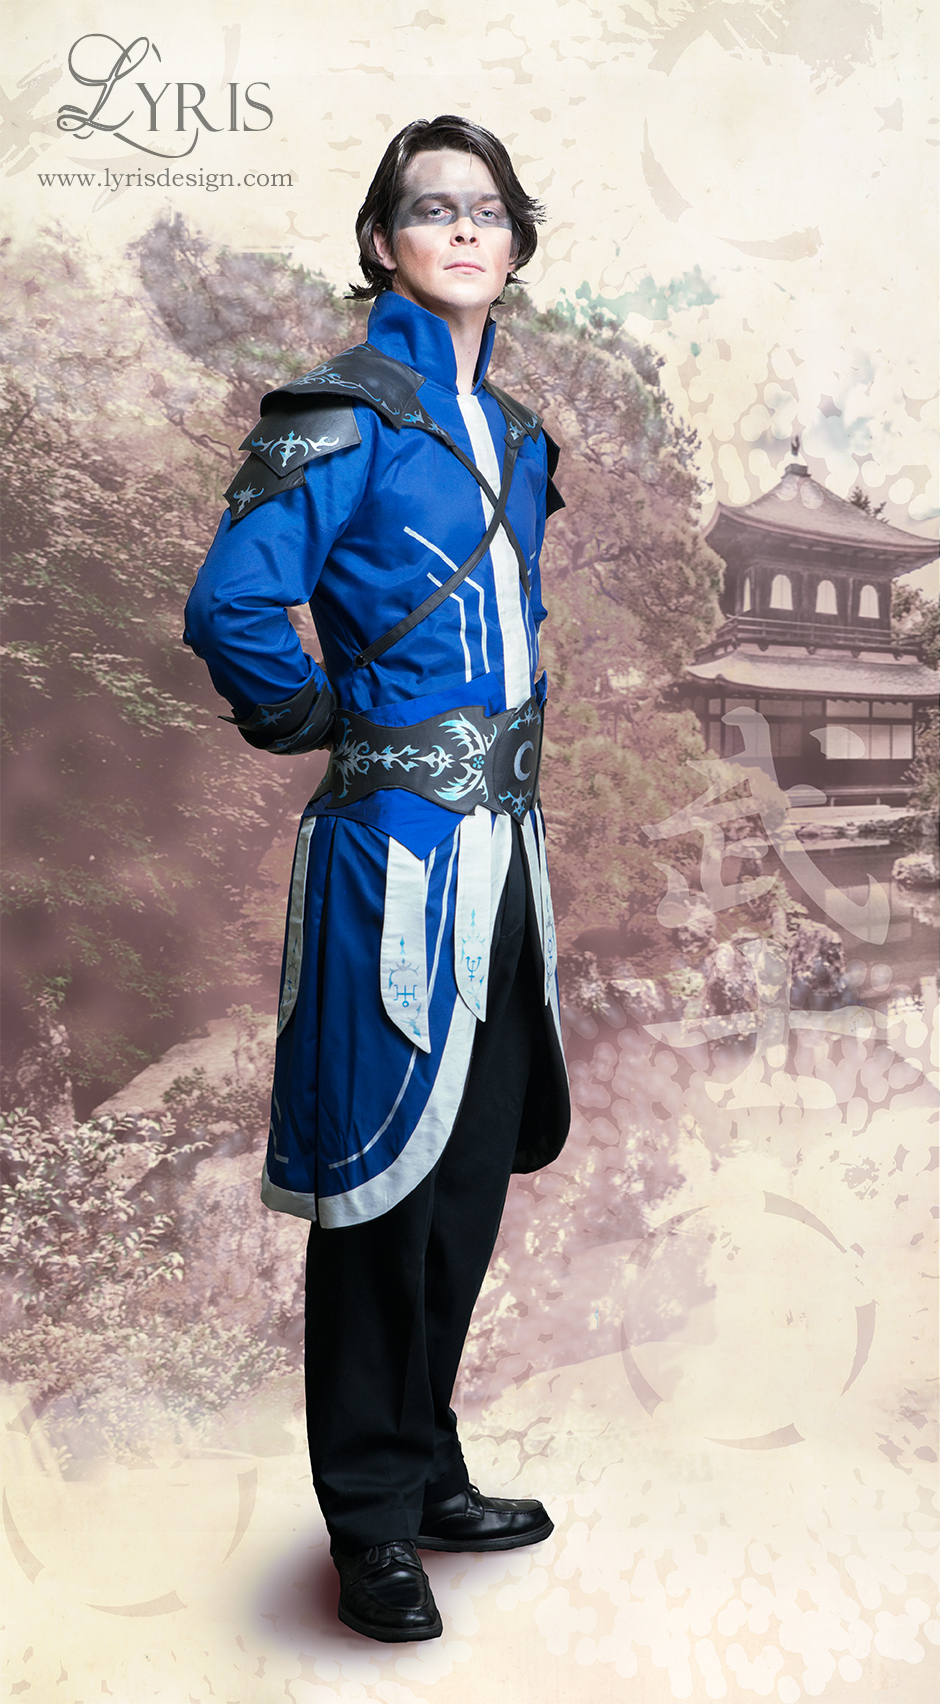 Corrin blue fantasy coat with black leather armour